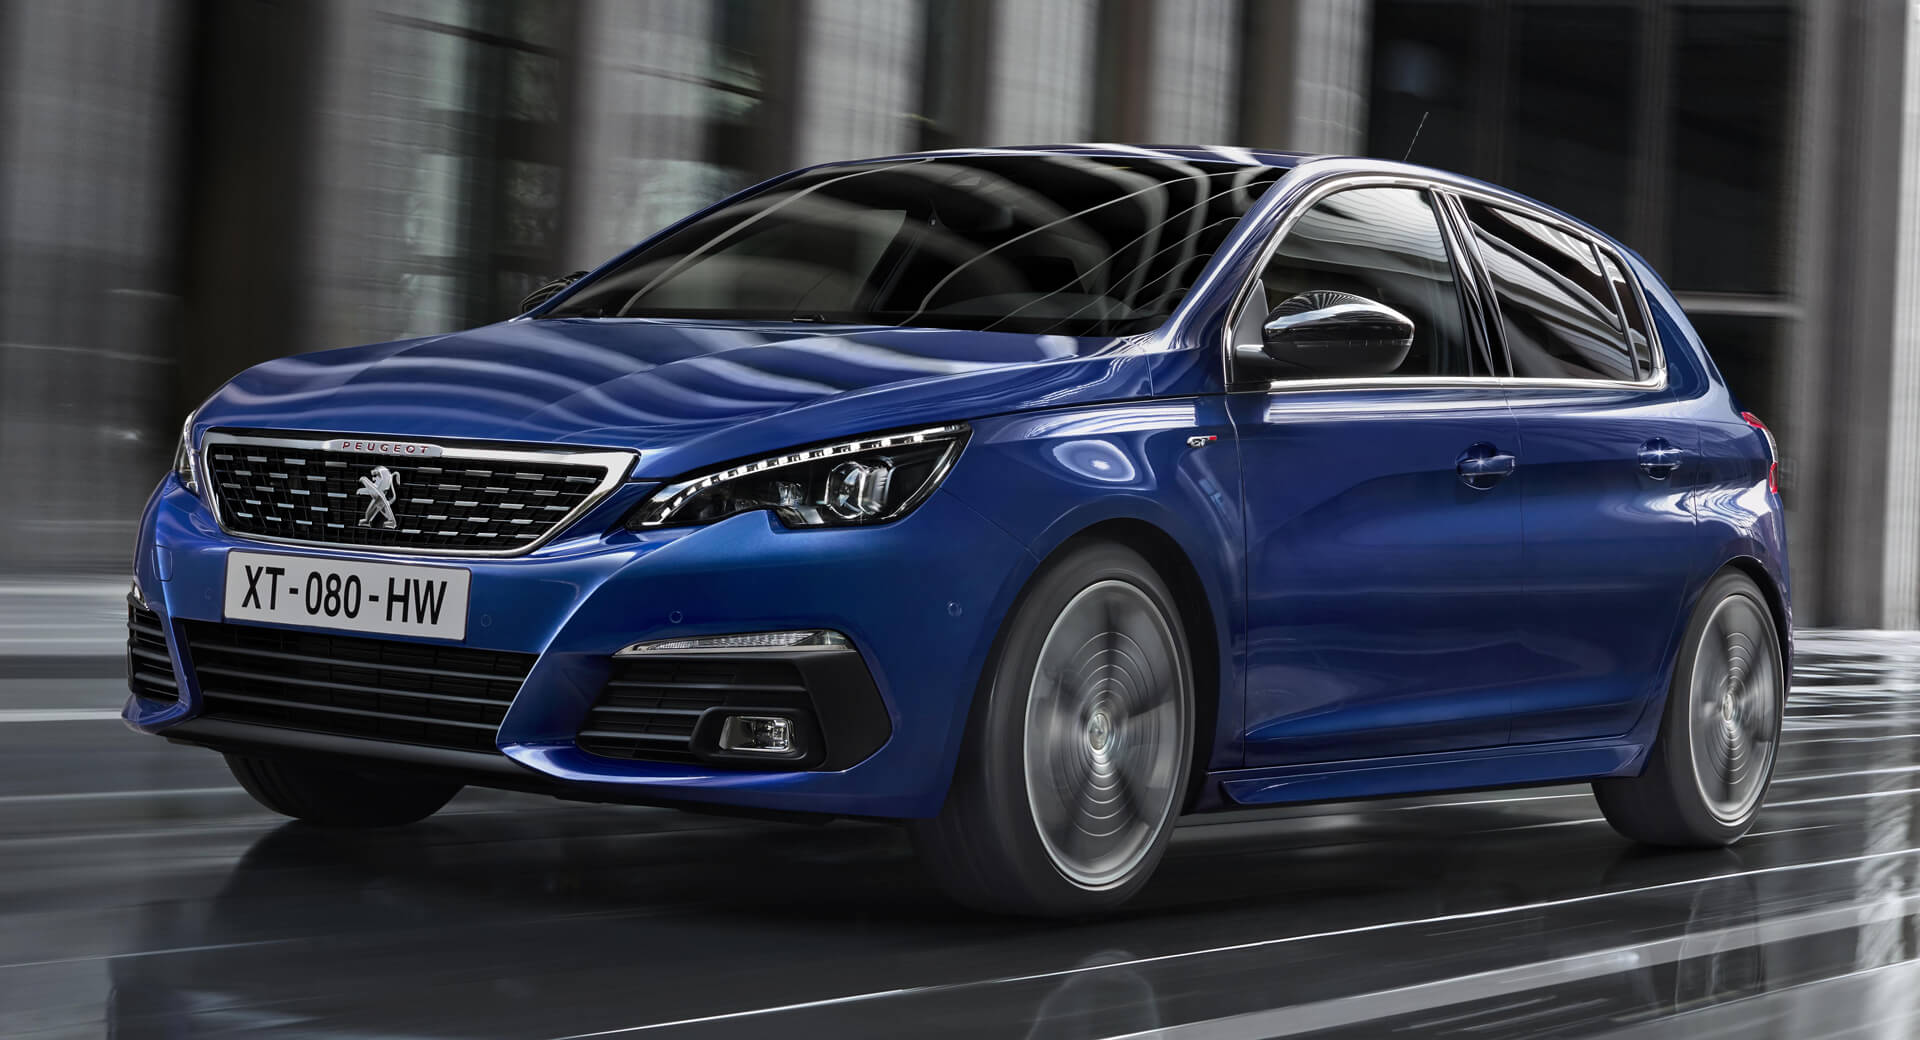 Opel Astra H OPC By JMS Has 19-Inch Alloys, Lower Ride Height